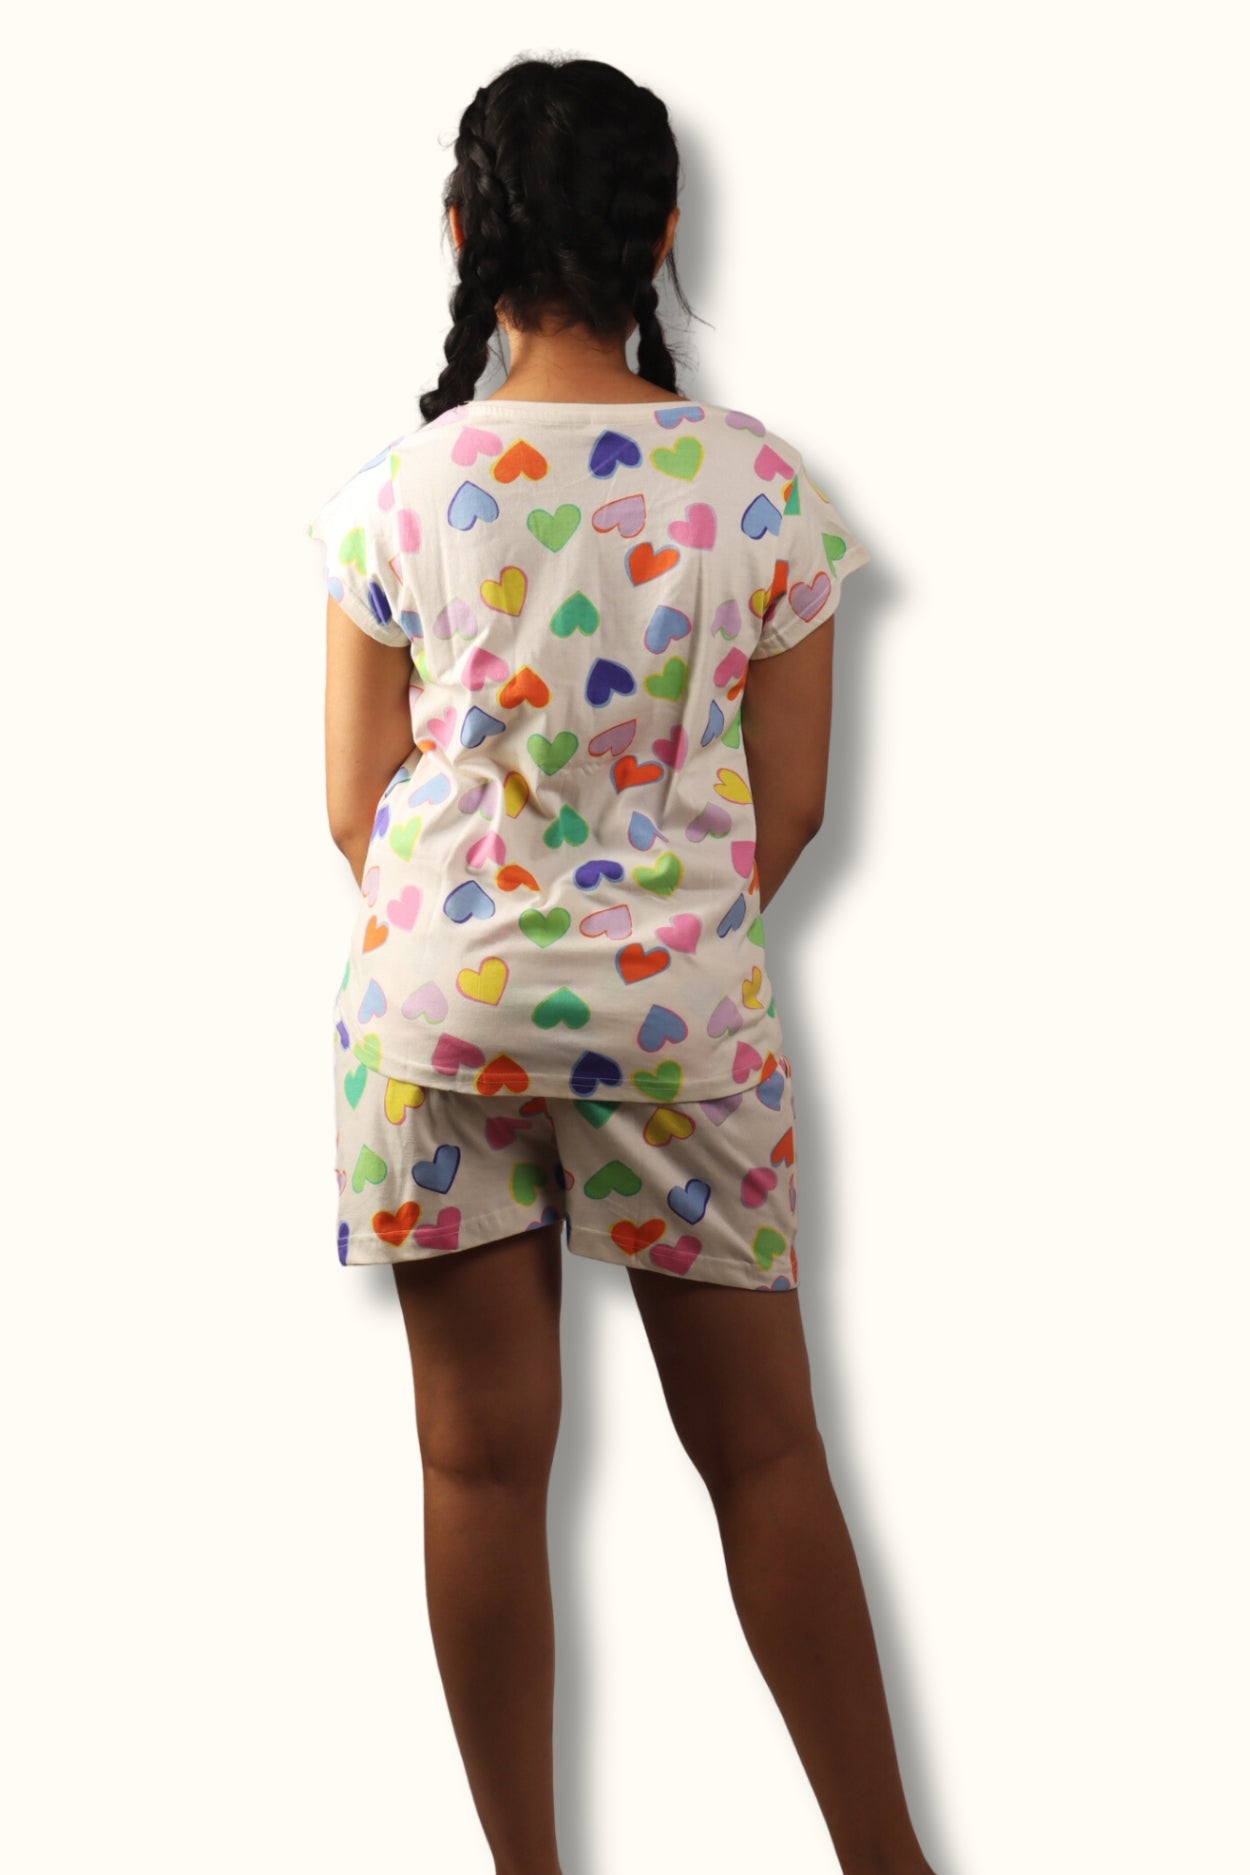 Night Suit For Women In White Colour - Multi Colour Hearts variant 1